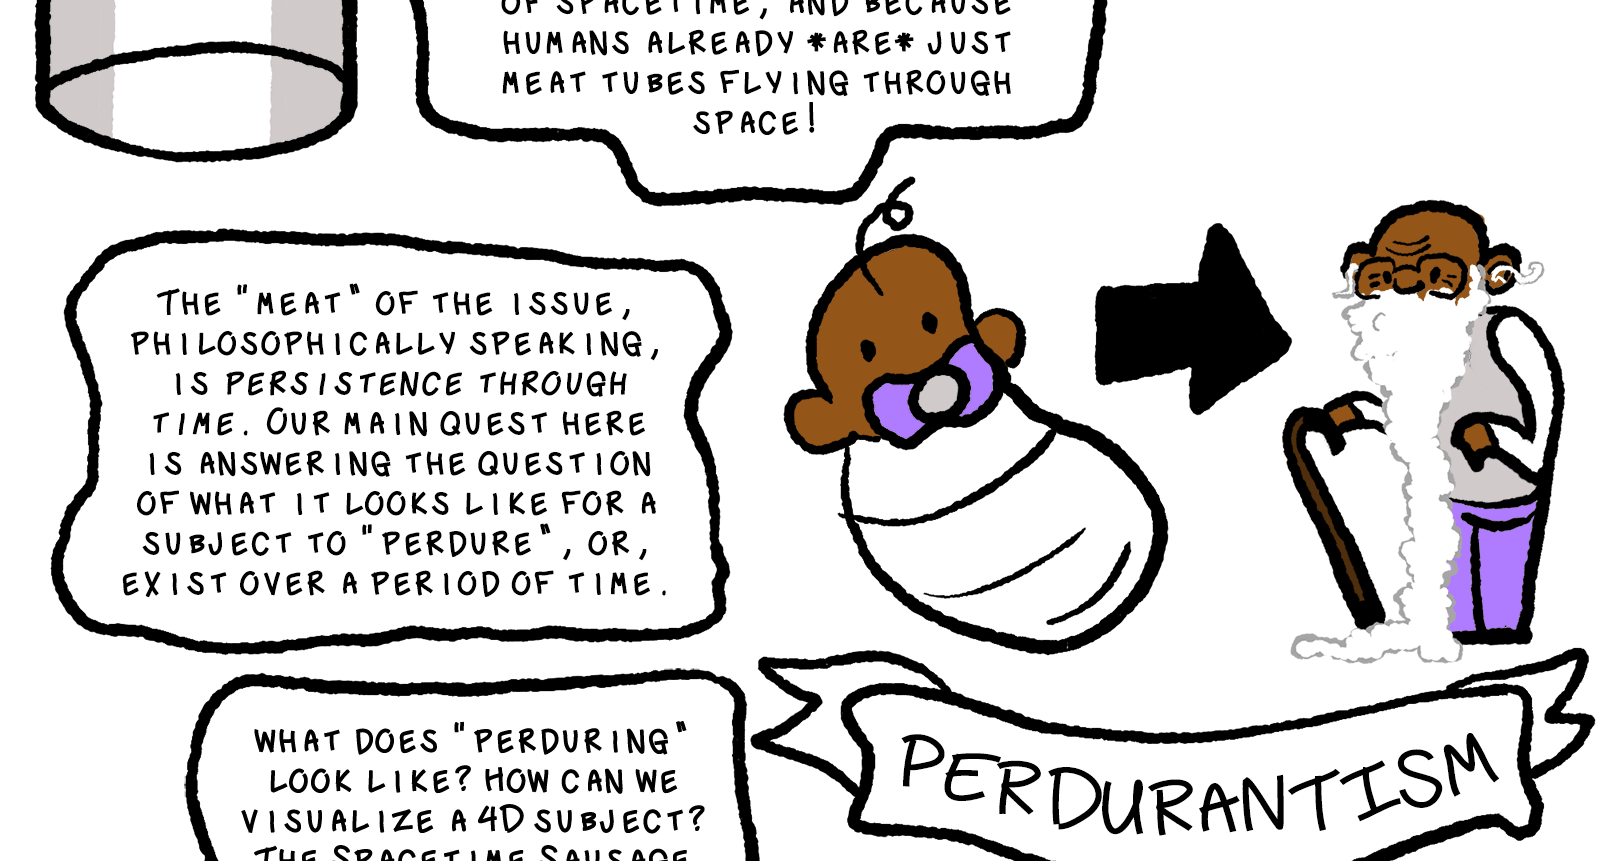 Another speech bubble appears, reading the 'meat' of the issue, philosophically speaking, is persistence through time. Our main quest here is answering the question of what it looks like for a subject to 'perdure', or, exist over a period of time. Next to this bubble we see a diagram showing on the left hand side, a Black baby with a purple pacifier then an arrow pointing to an old Black man with a really long white beard and purple pants. The diagram is labelled with a banner reading 'Perdurantism'. Another bubble continues, what does 'perduring' look like? How can we visualize a 4D subject? The spacetime sausage is a good first step.